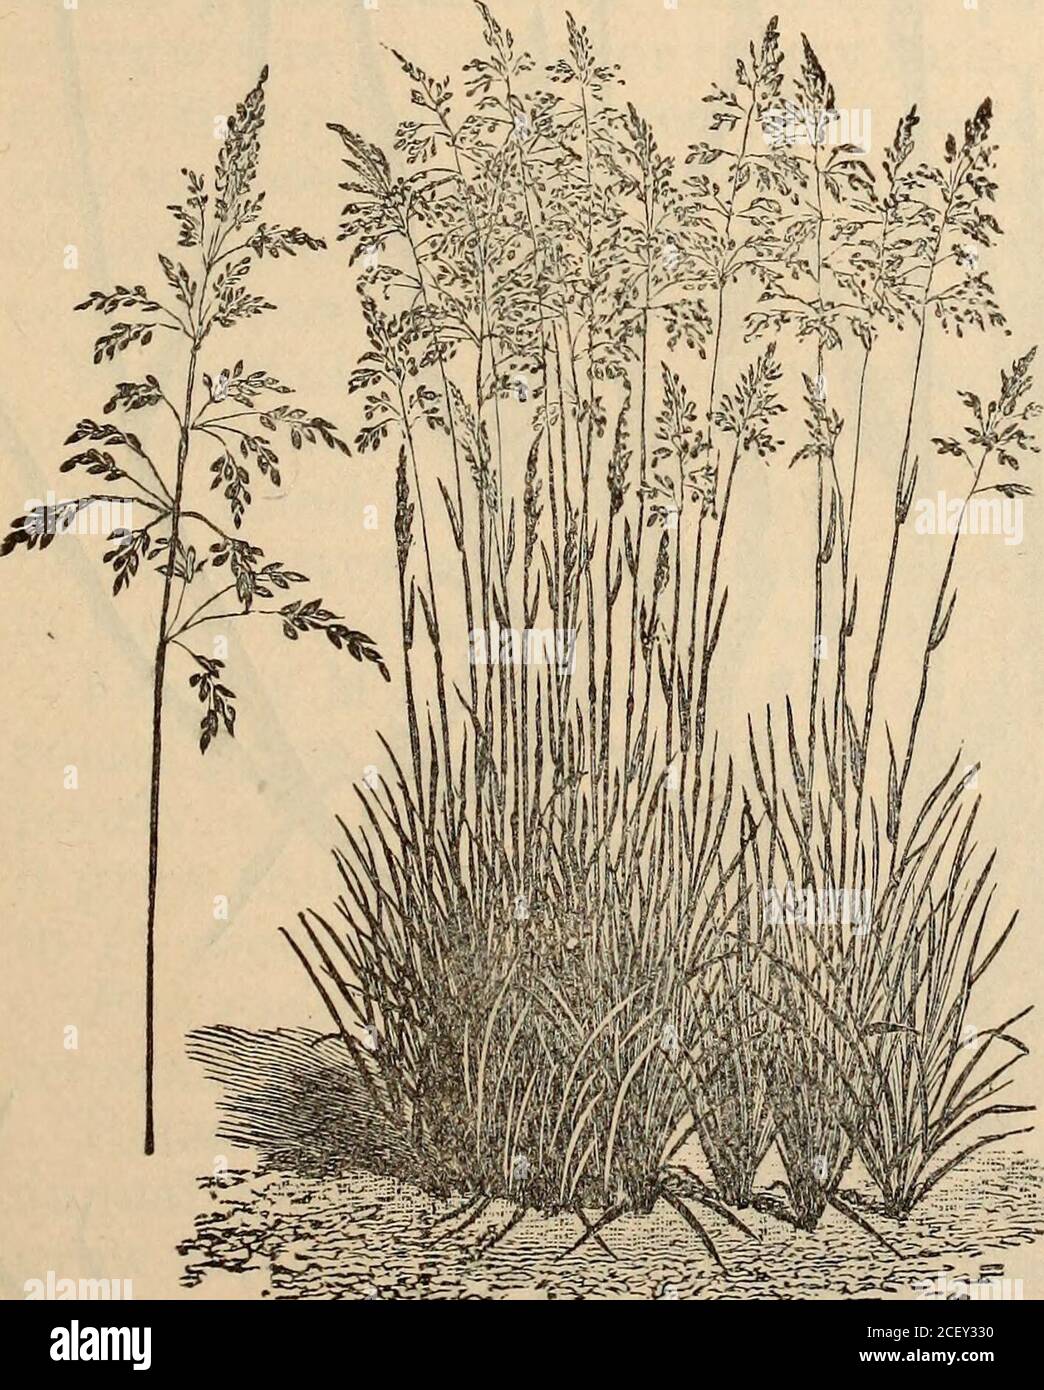 . Annual report of the North Carolina Agricultural Experiment Station. and platit grew fairly, producing culms 24 inches high, bearing a largeamount of seed. Killed by the first frost. Of little value. Heff Grass—Eragrostis Ahysinnioa.—A medium growing annualgrass, probably a cultivated variety of E. pilosa. In Abysinnia theabundant seeds of this grass are used to make bread. On our low-land plat it grew finely and produced a very heavy crop of seed, which dropped as soon as ripe. Failed to shoot from stubblewhen mown. This annualgrass is inferior to the milletsand non-saccharine sorghums,and Stock Photo